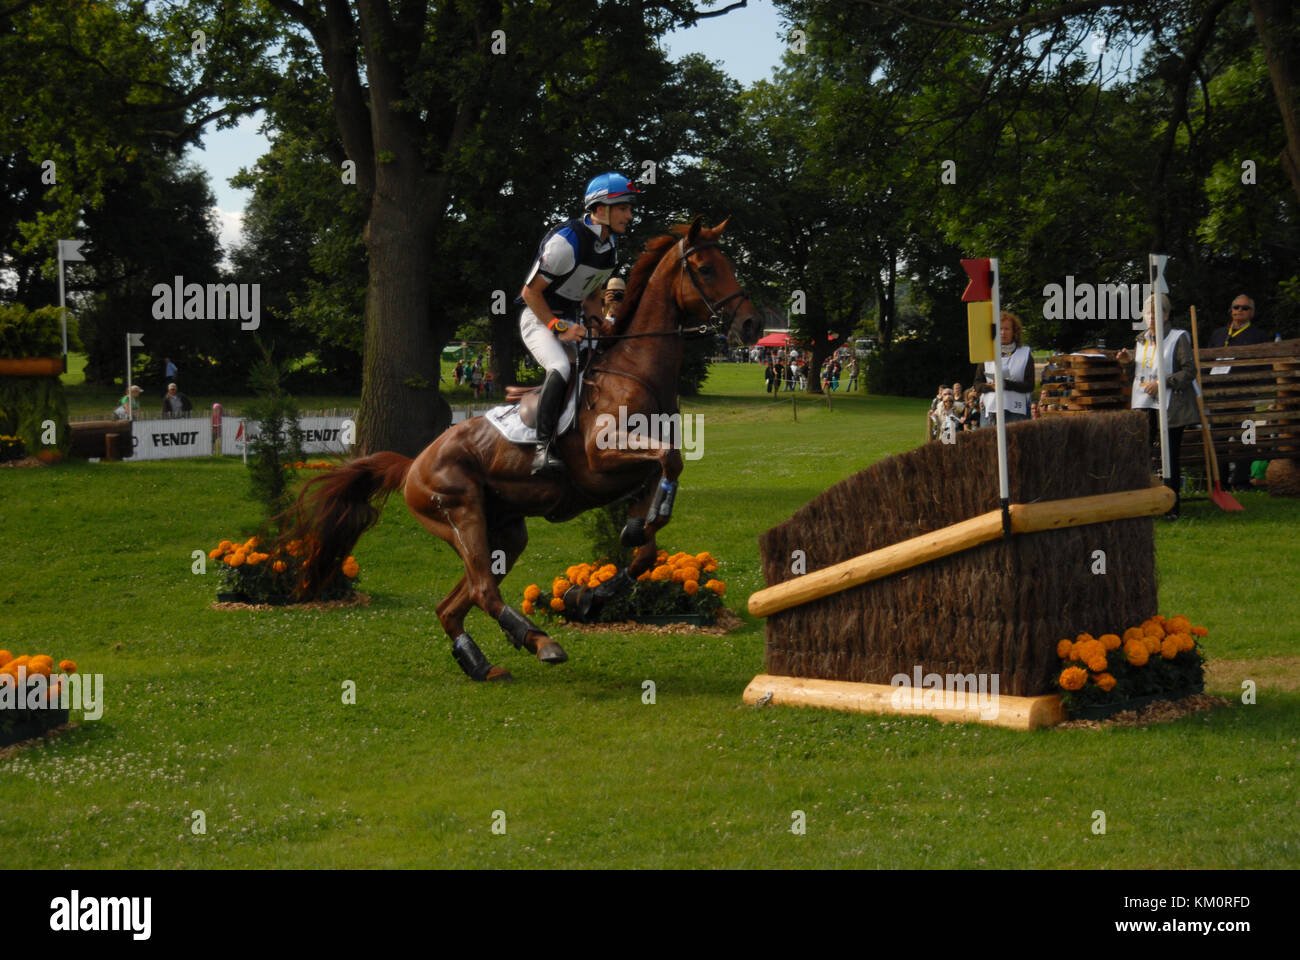 Aachen, Germany - July 7: CHIO Eventing, start phase of a jump Stock Photo